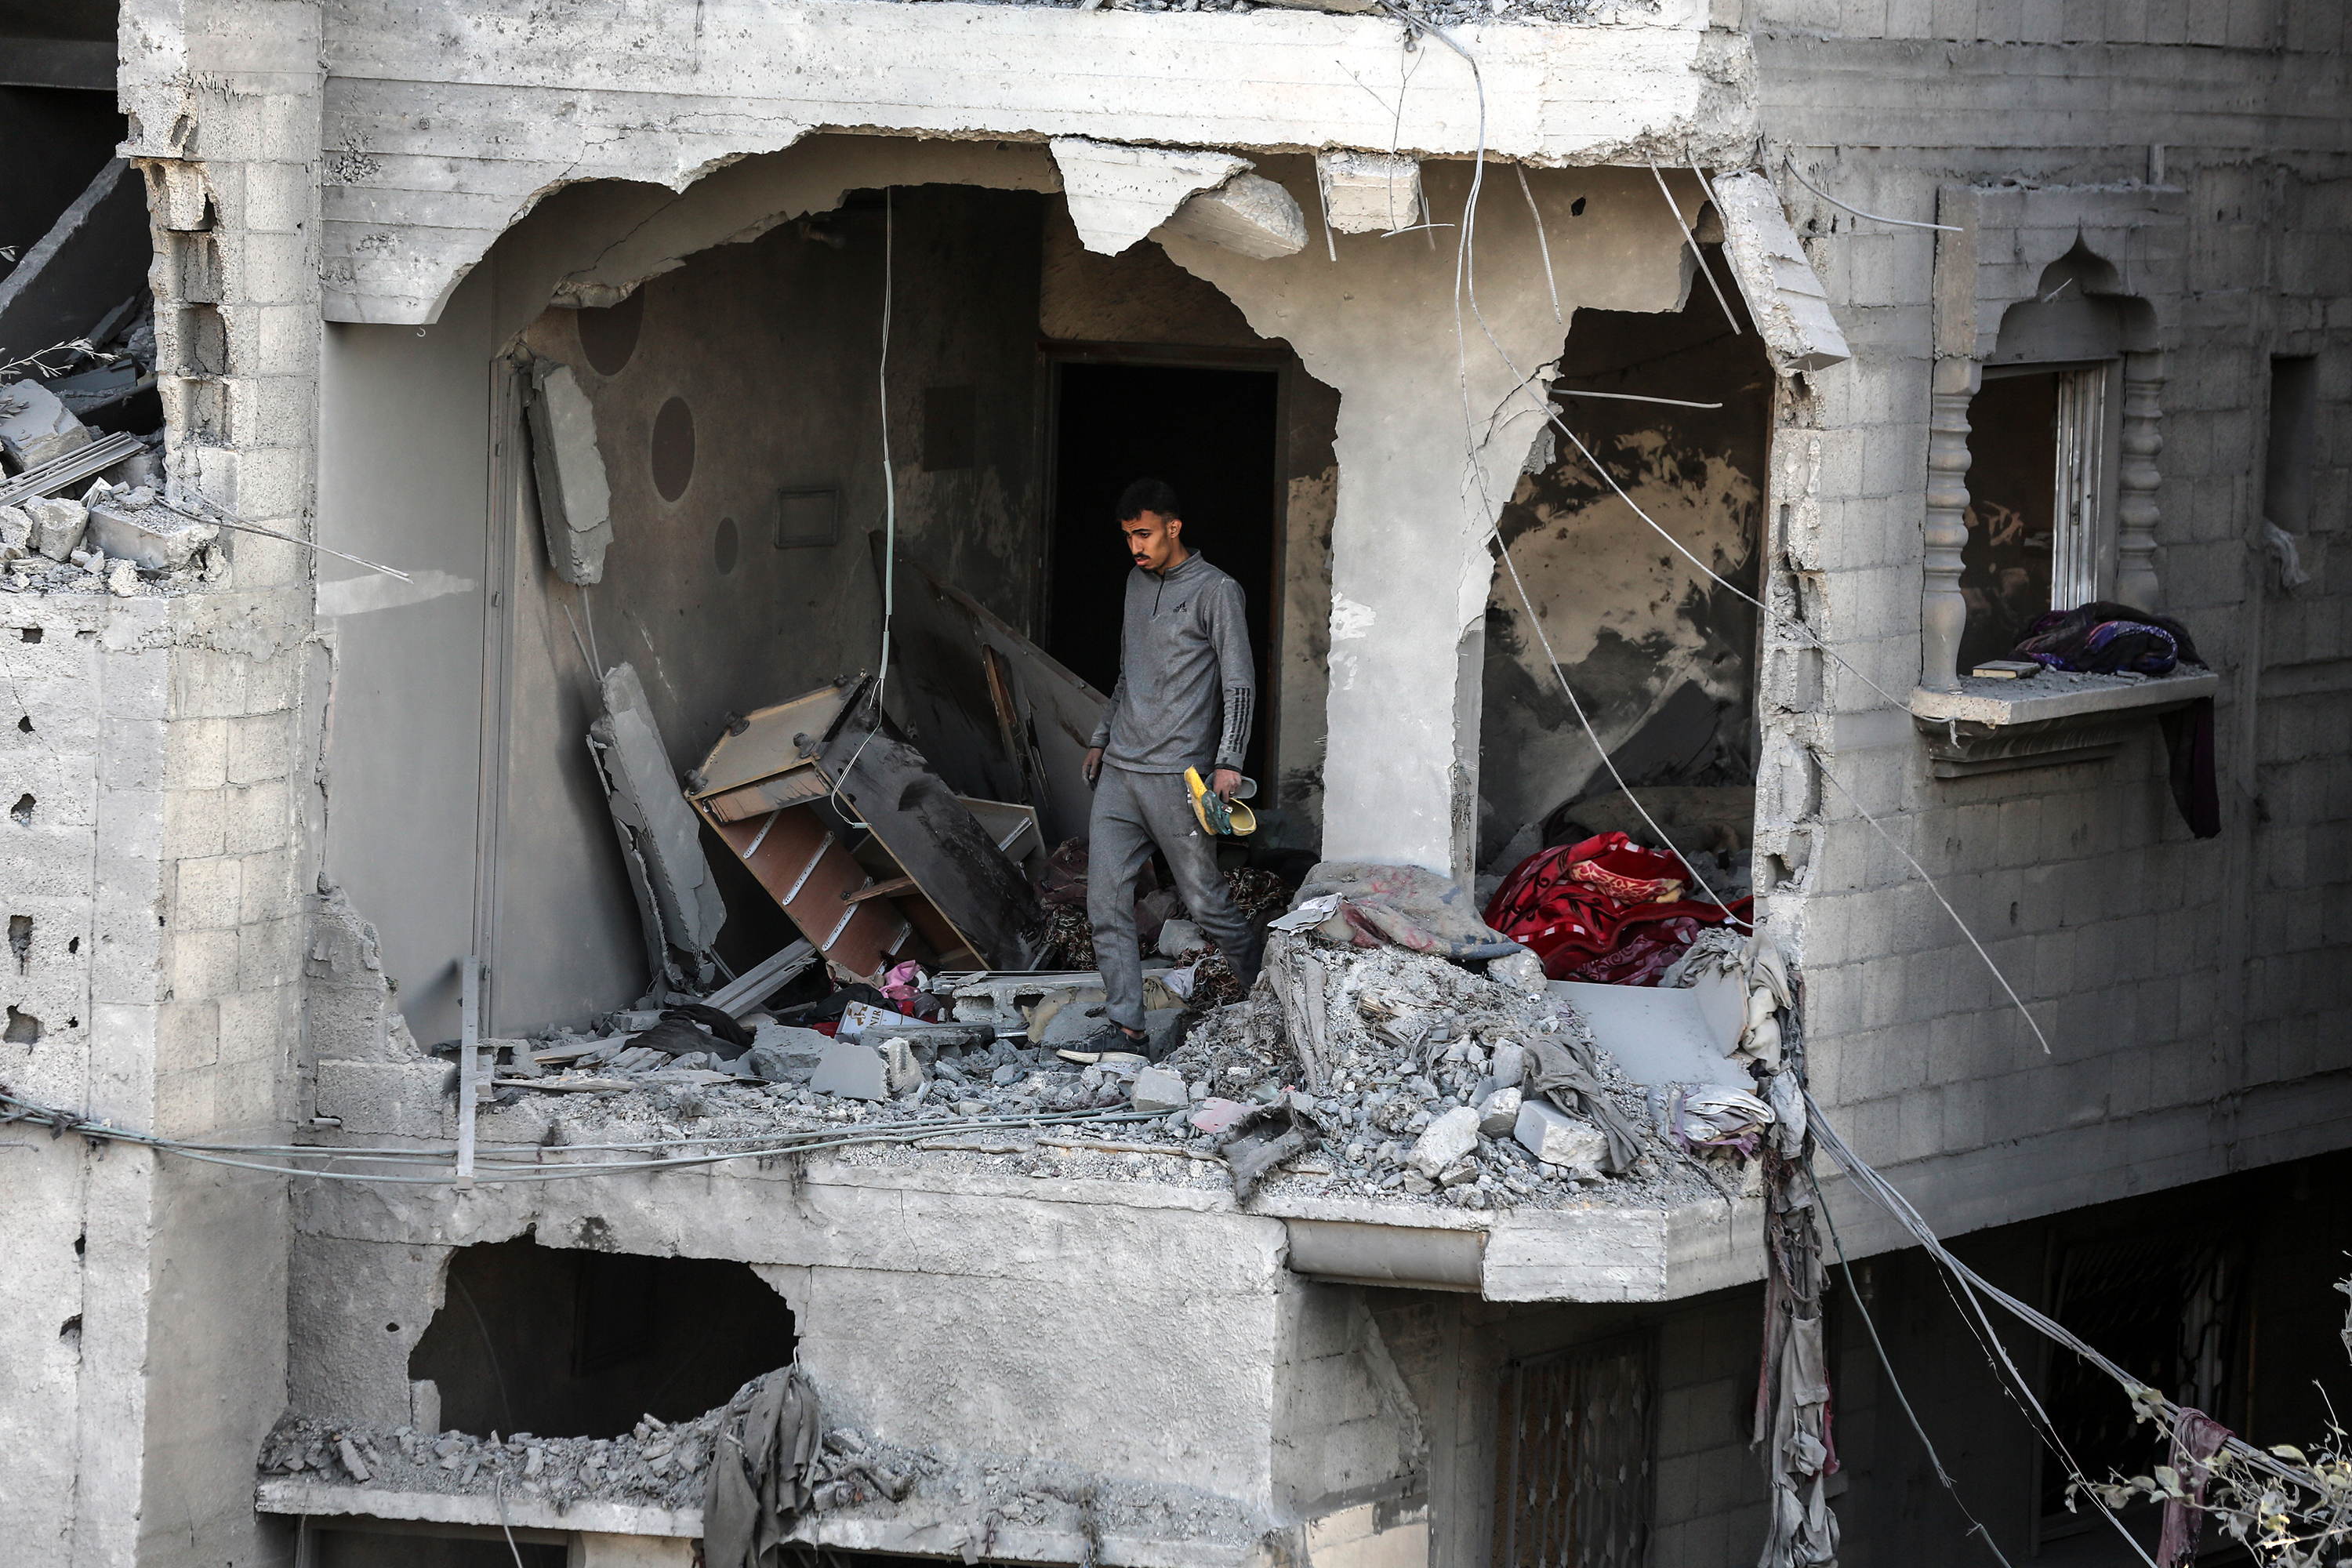 Palestinians inspect the ruins of a house destroyed by Israeli shelling in Deir al-Bala, Gaza on March 4.